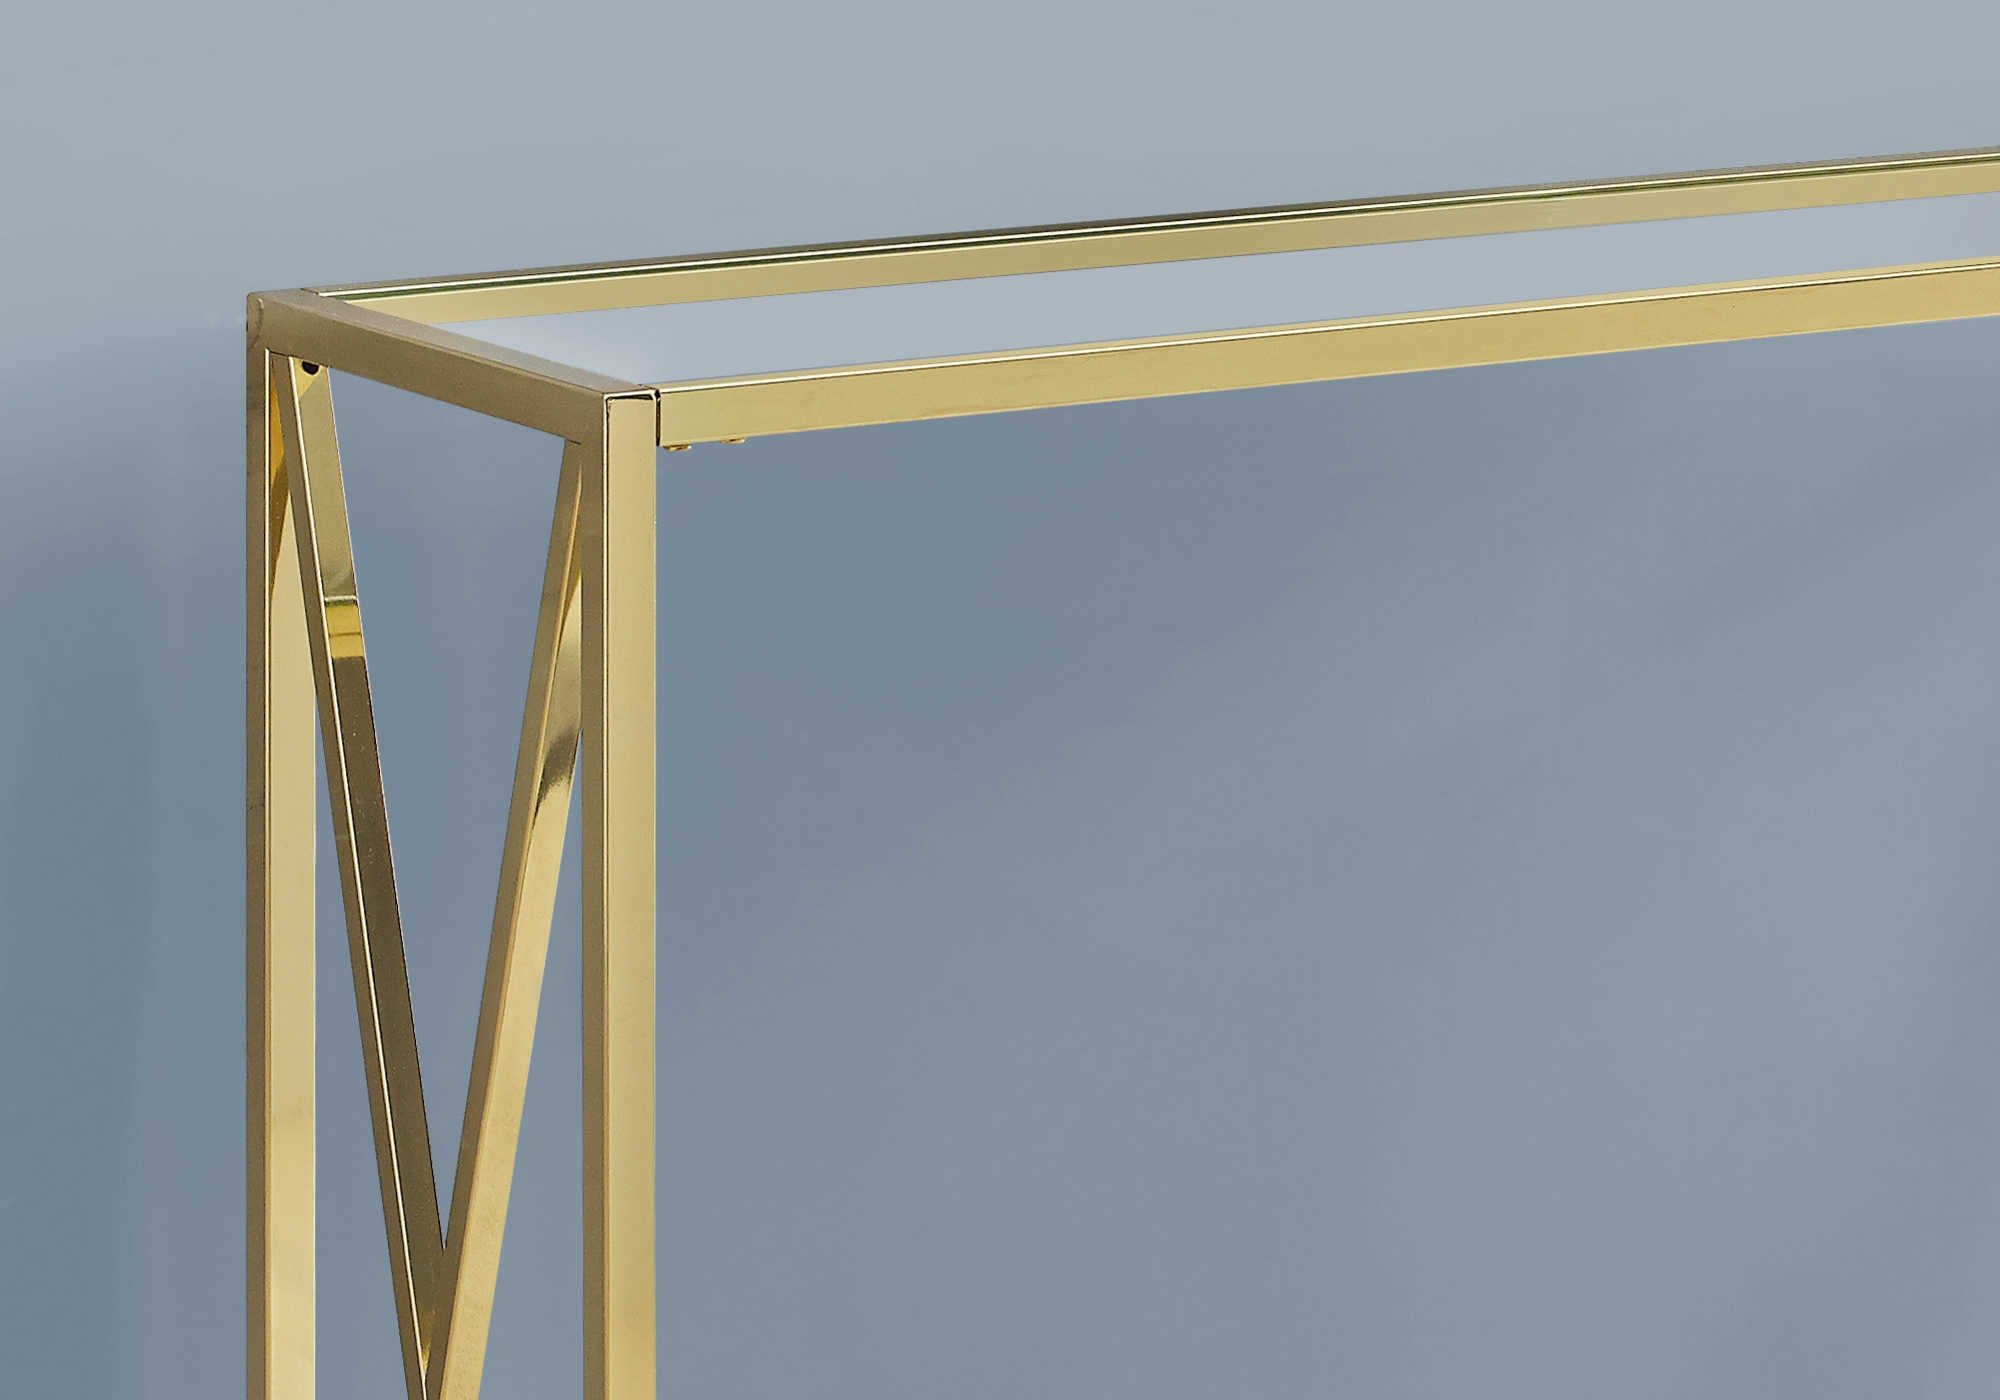 I 3446 - ACCENT TABLE - 42"L / GOLD METAL WITH TEMPERED GLASS BY MONARCH SPECIALTIES INC